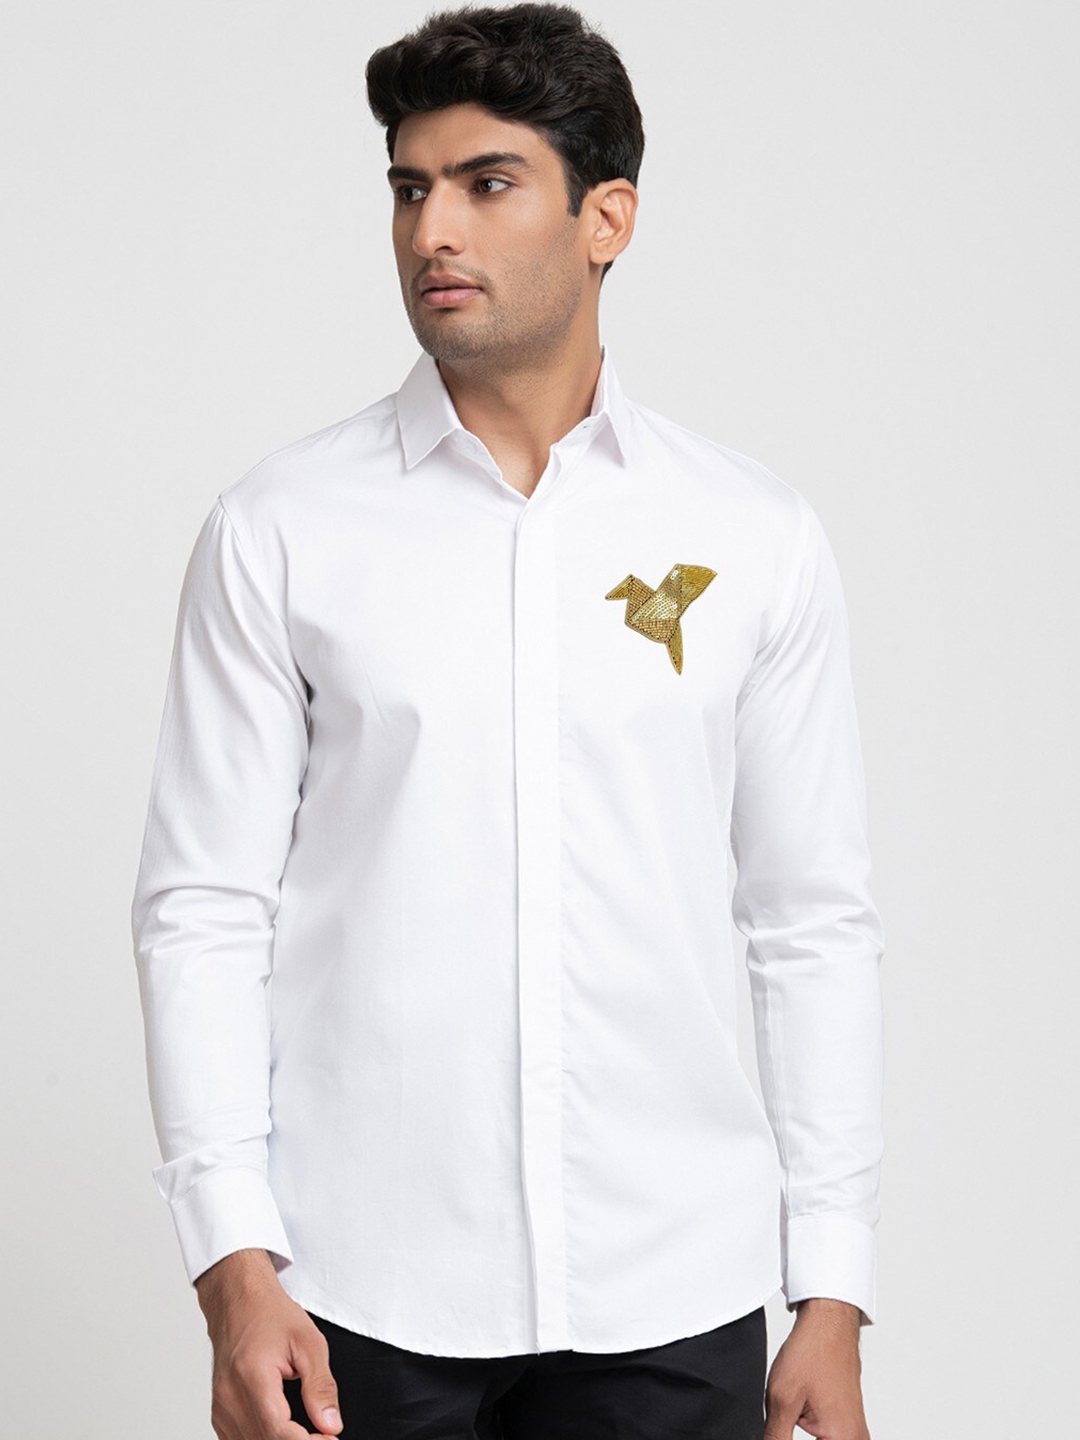 HILO Design Comfort Embellished Detail Cotton Casual Shirt (43) by Myntra